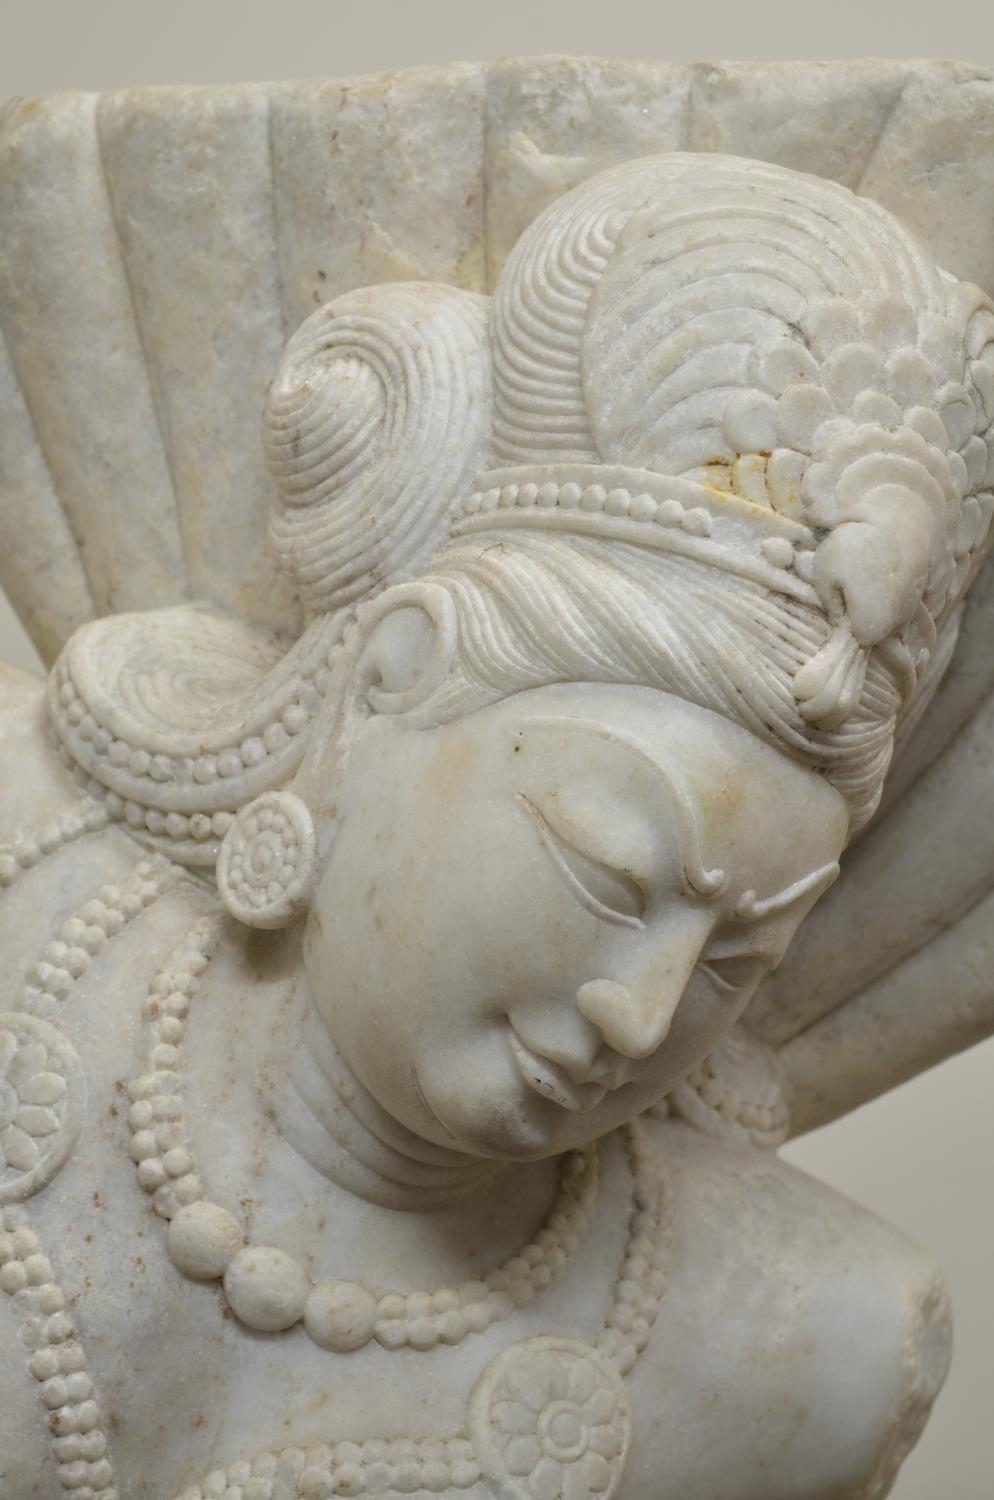 Large white marble head and torso model of Tara, Female Bodhisattva especially revered in - Image 2 of 3